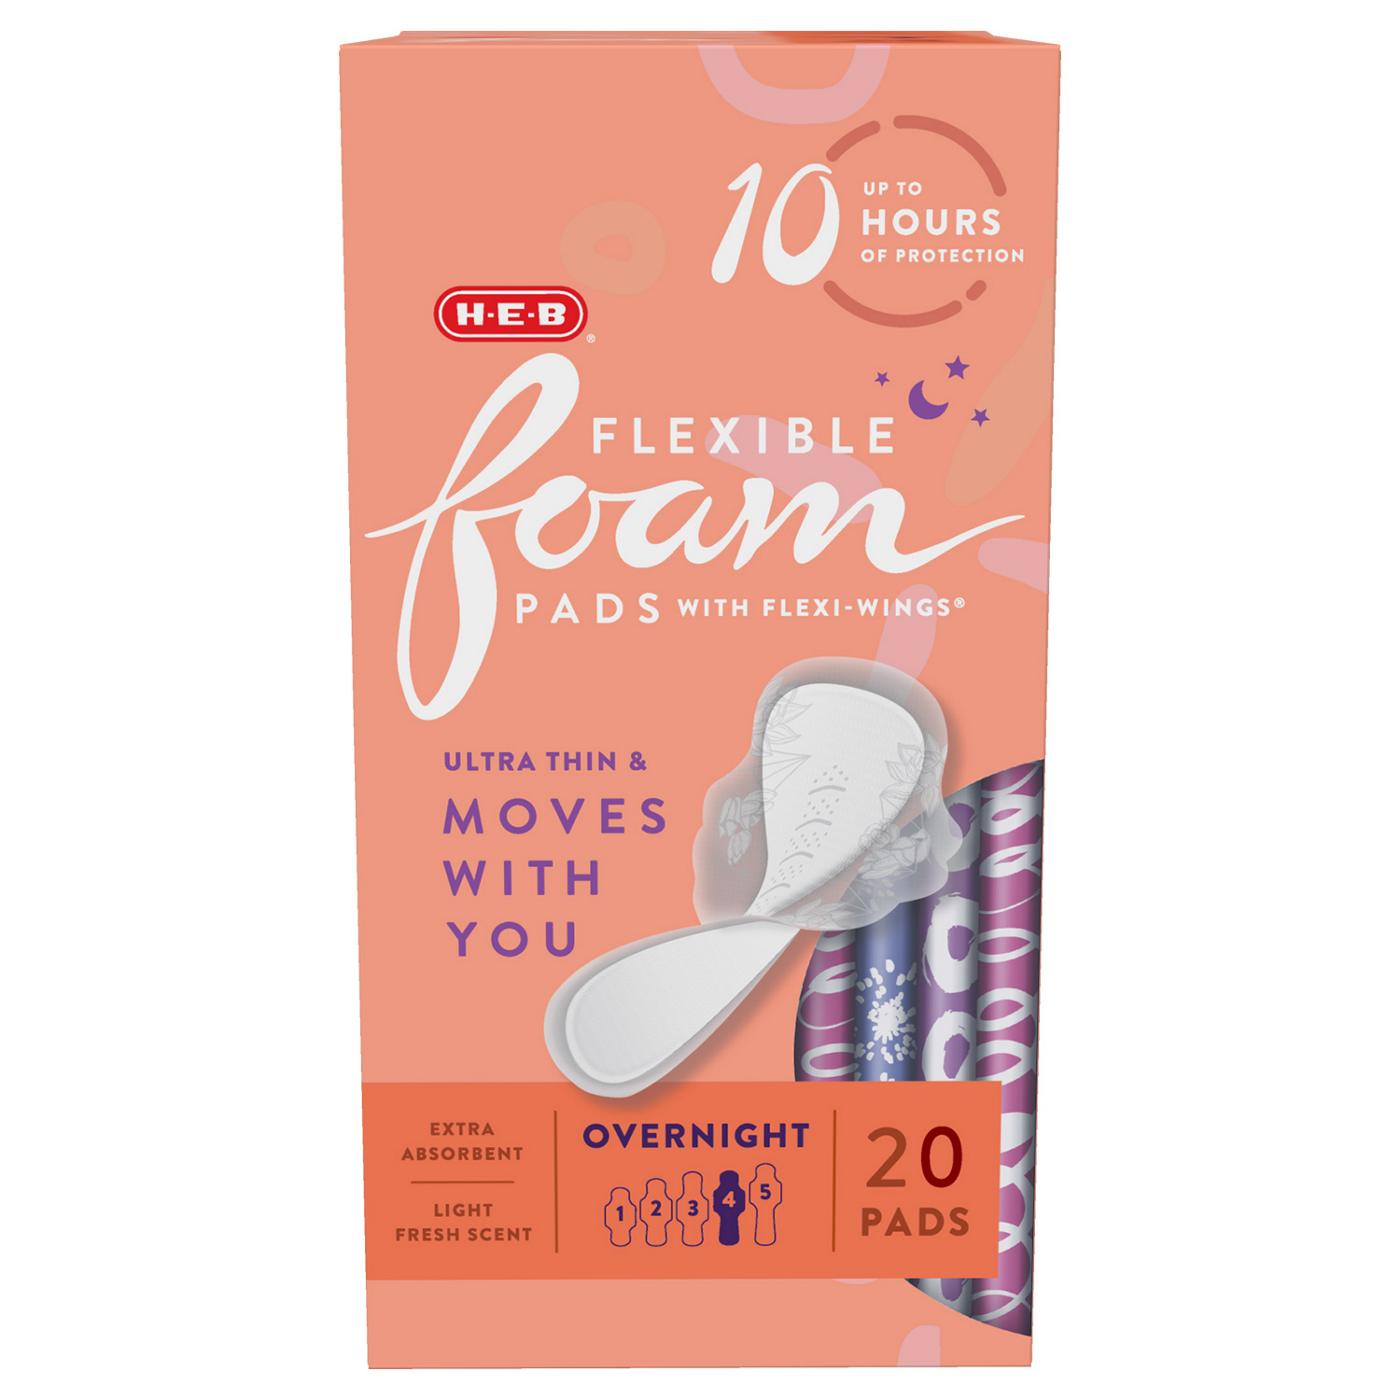 H-E-B Flexible Foam Pads with Flexi-Wings - Overnight; image 1 of 2